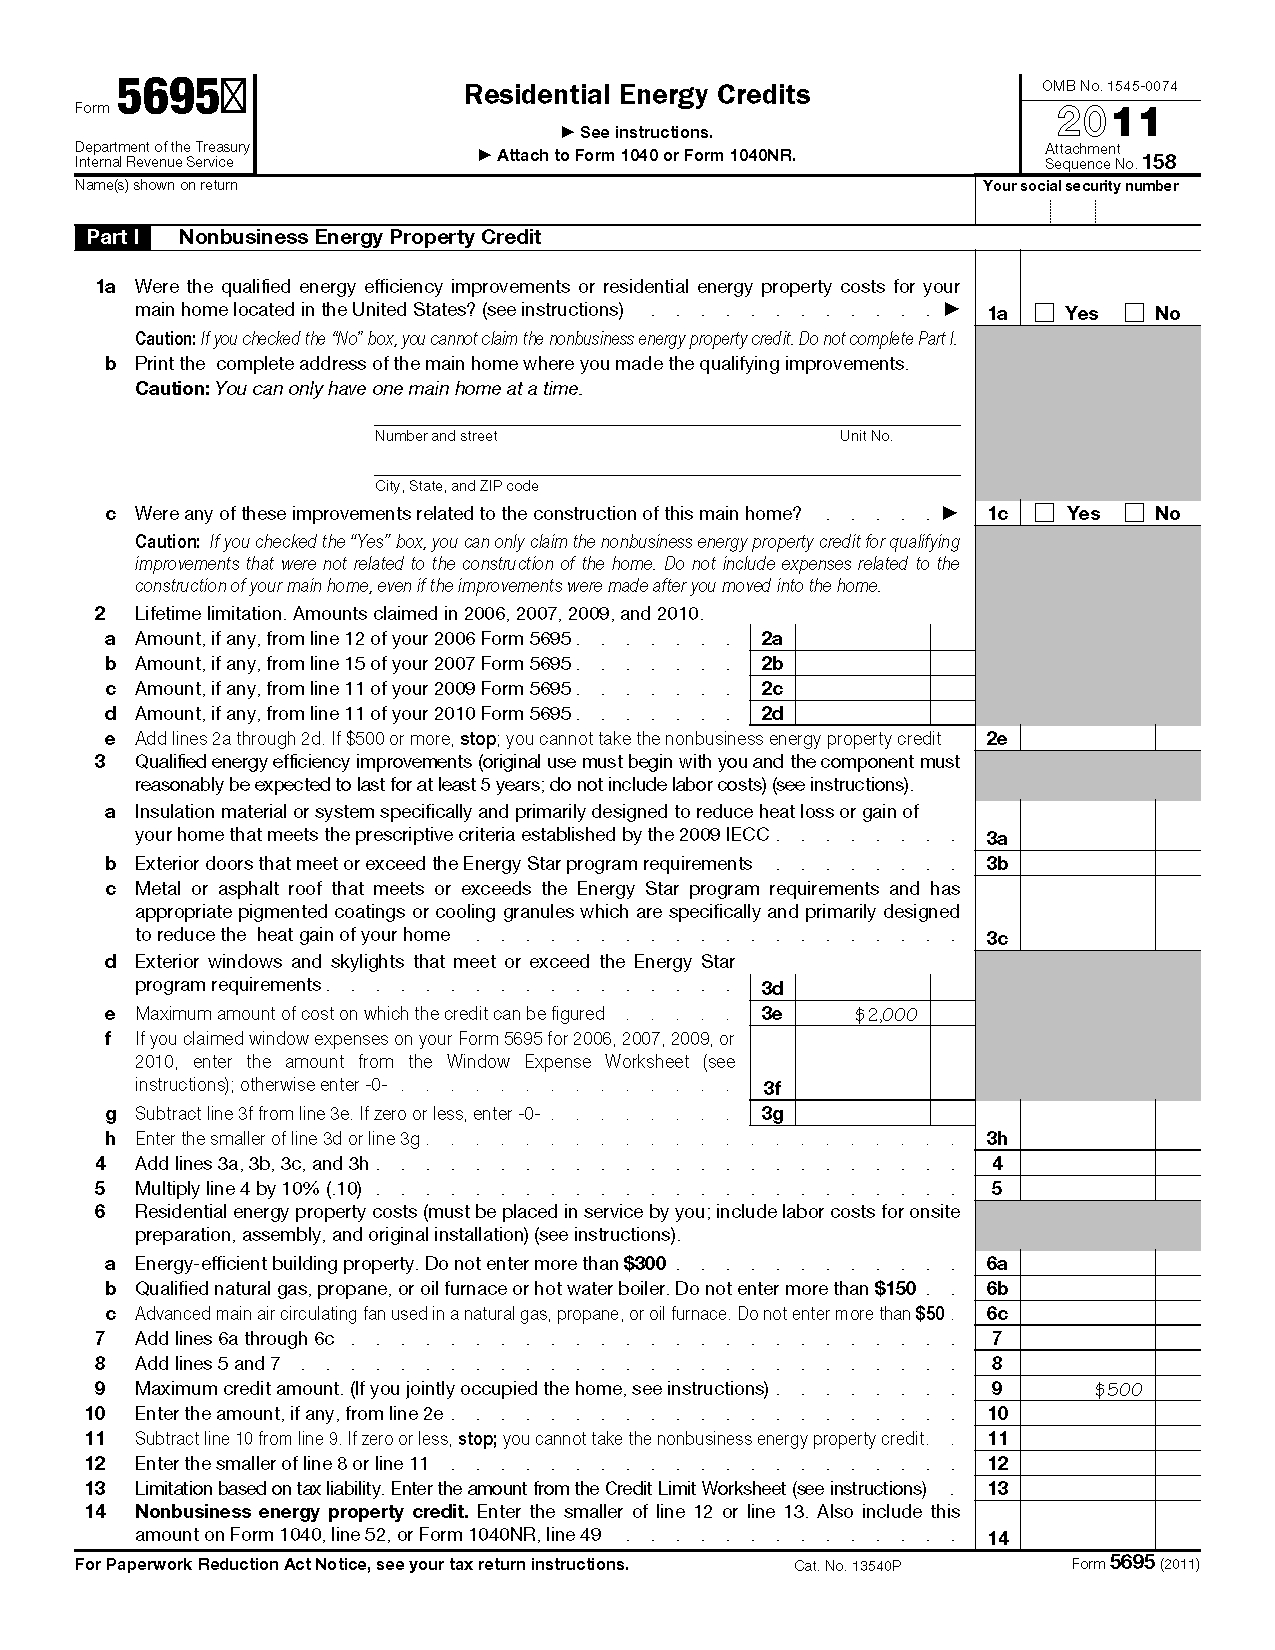 Residential Energy Efficient Property Credit Limit Worksheet Math With Residential Energy Efficient Property Credit Limit Worksheet